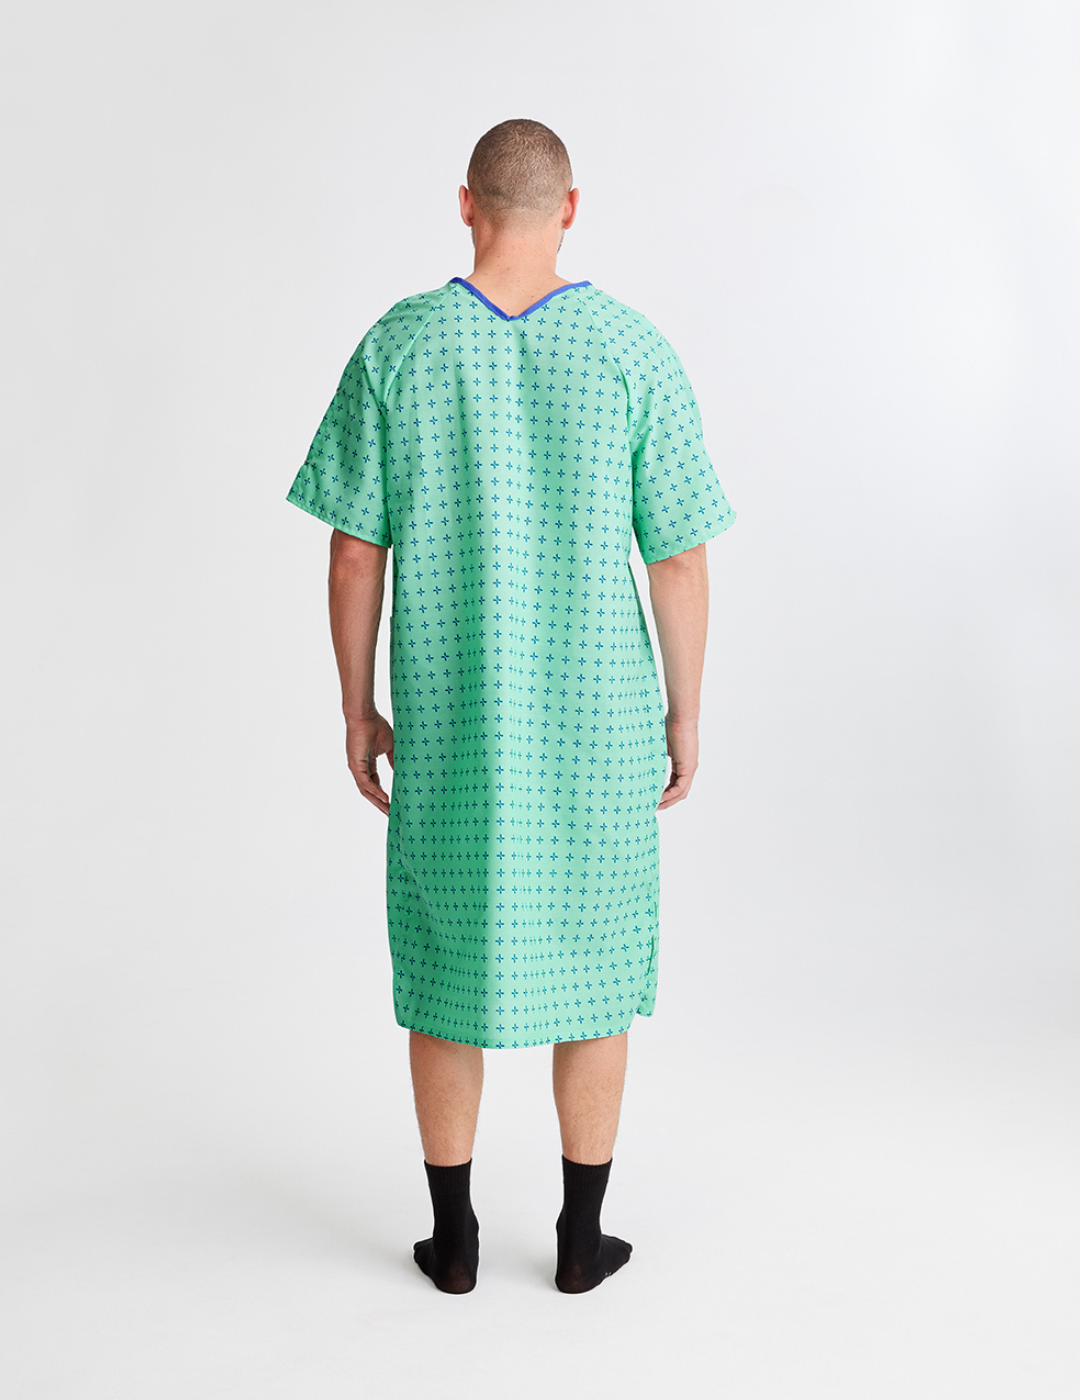 Hospital Patient Gown by Care+Wear x Parsons Standard